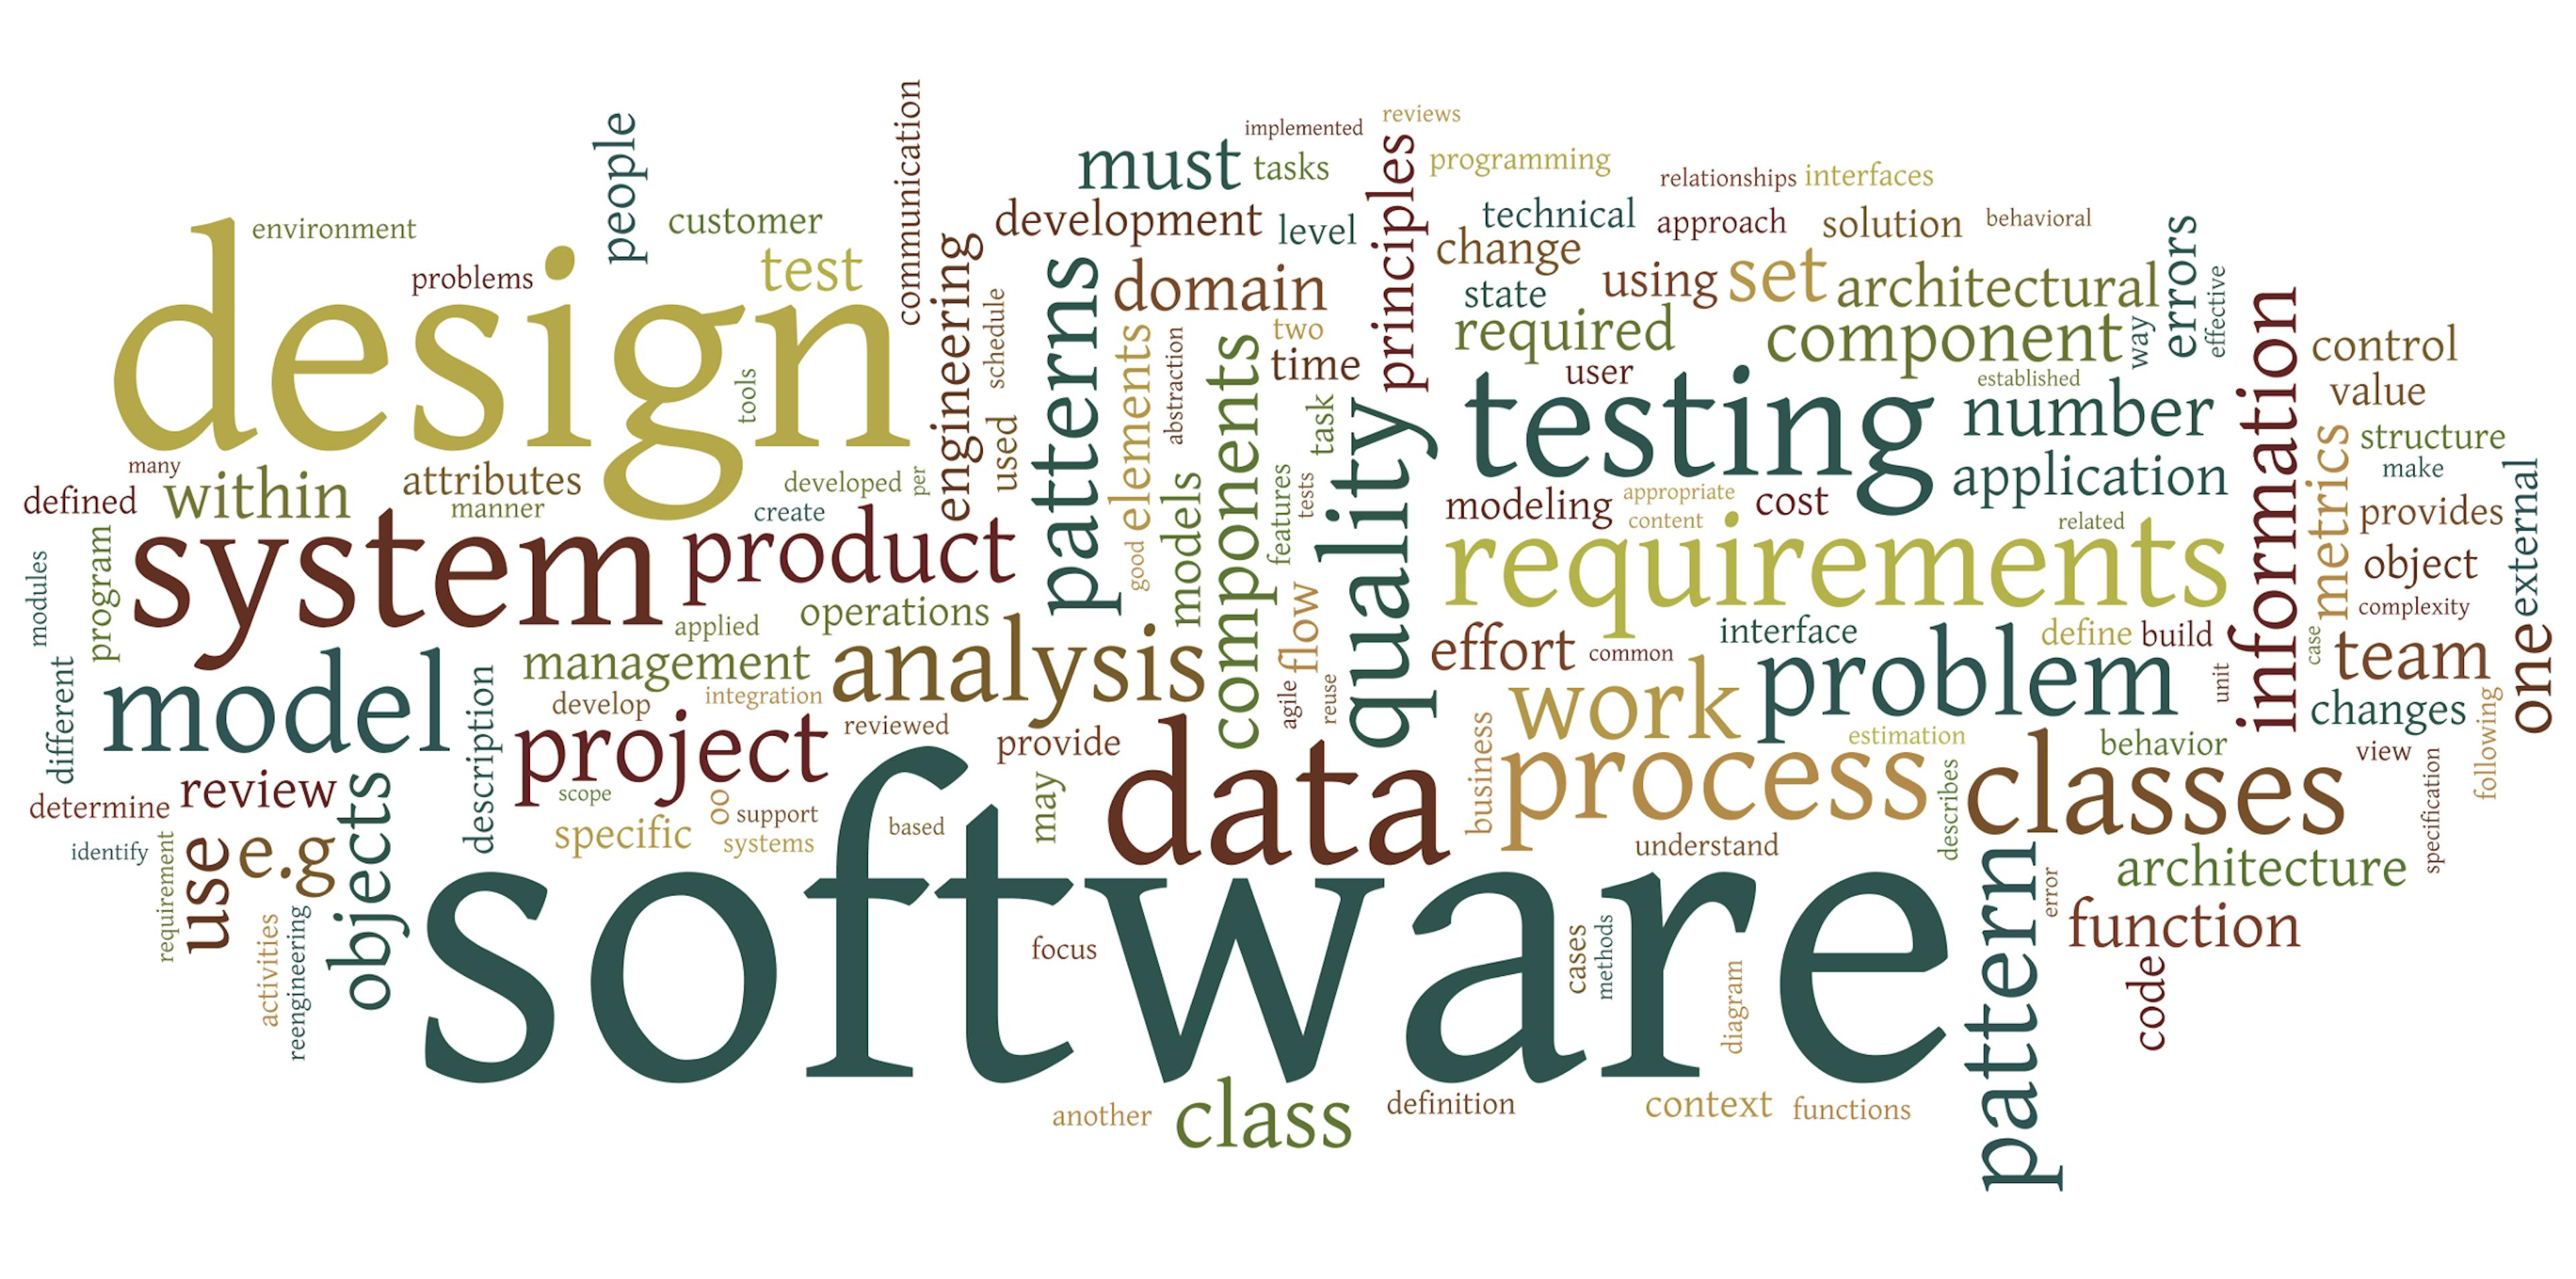 featured image - Rules of Thumb for Software Engineering